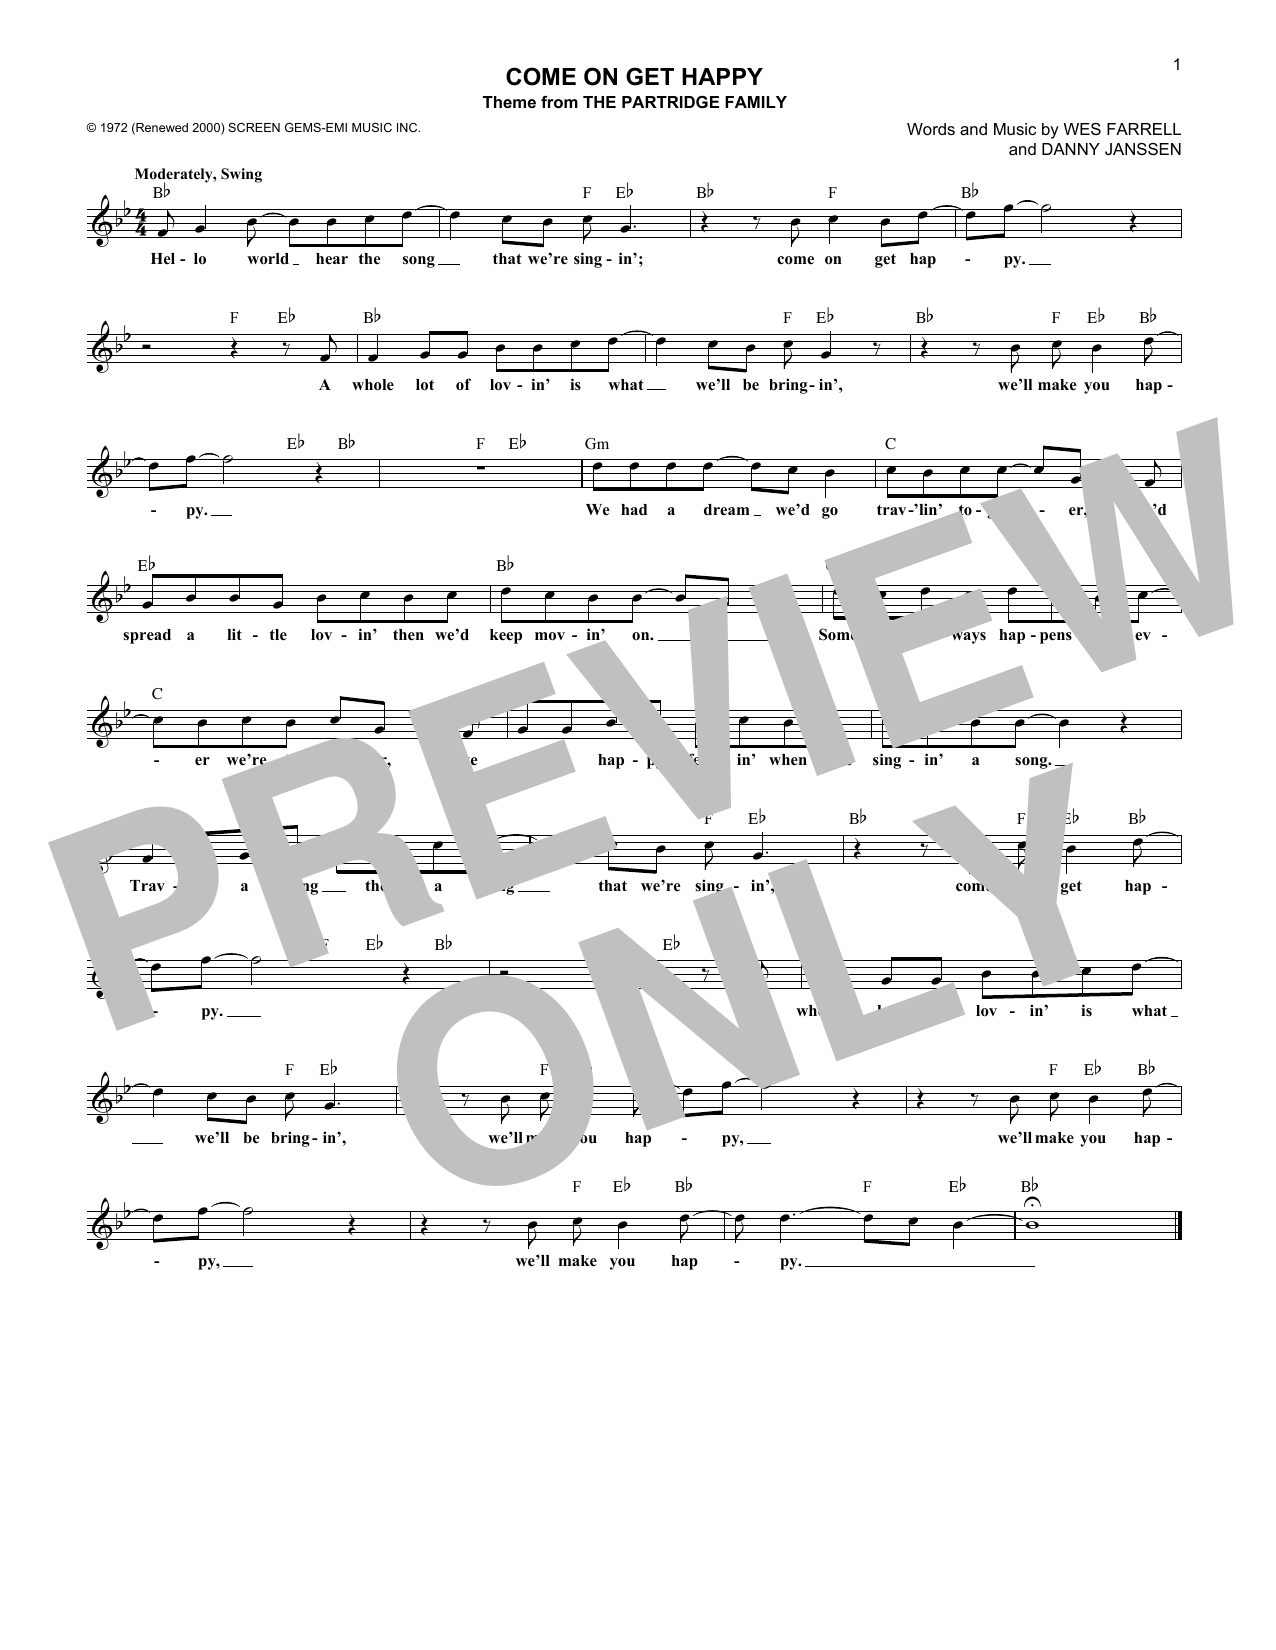 Download The Partridge Family Come On Get Happy Sheet Music